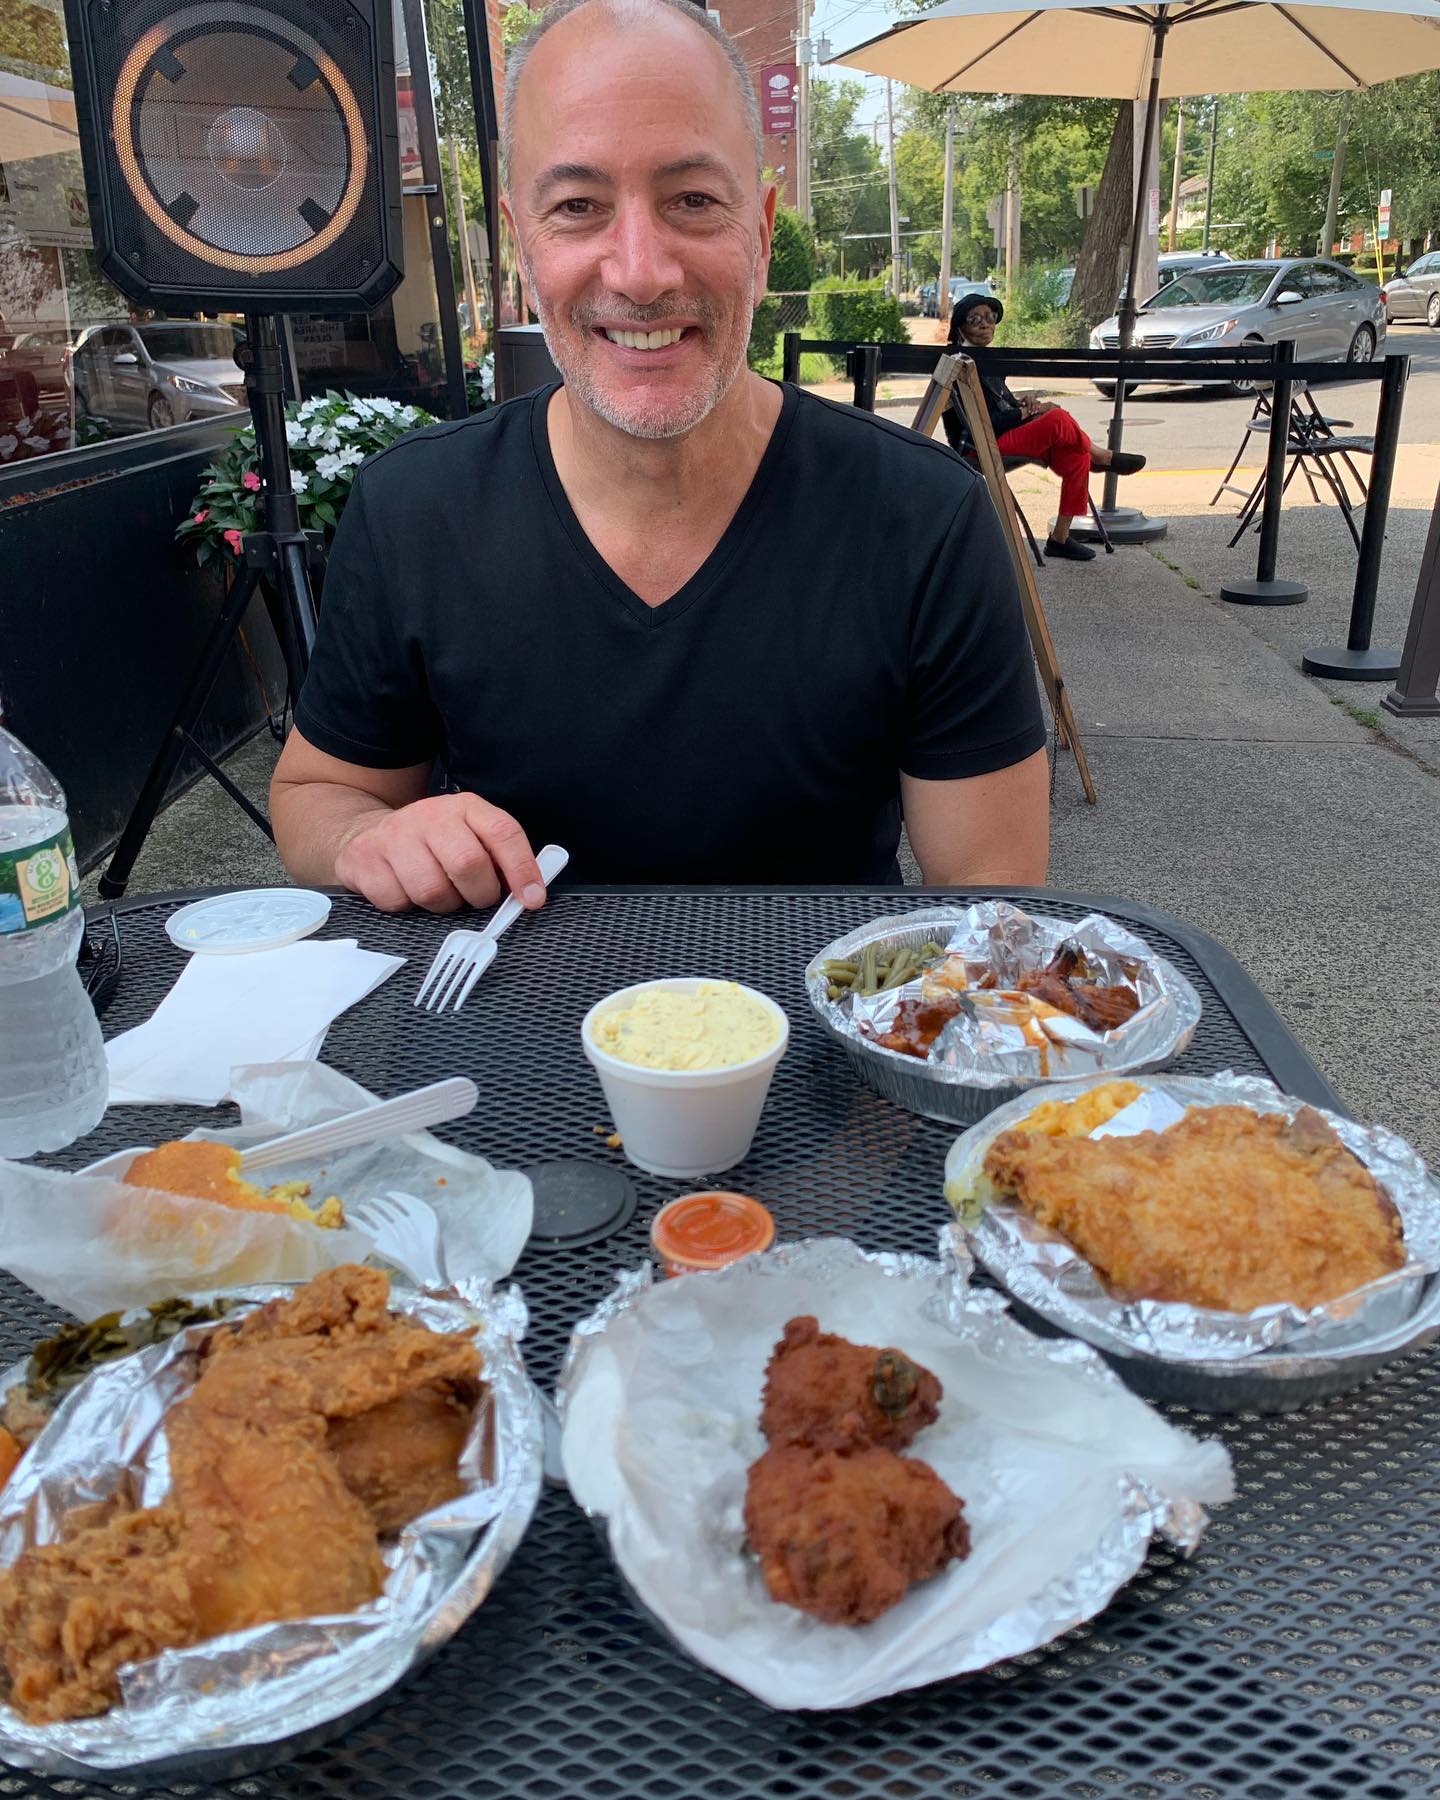 PODCAST – Thursday, August 26: Chaz’s New Haven Soul Food Experience; Dumb Ass News; Comedian Steve Hostetter